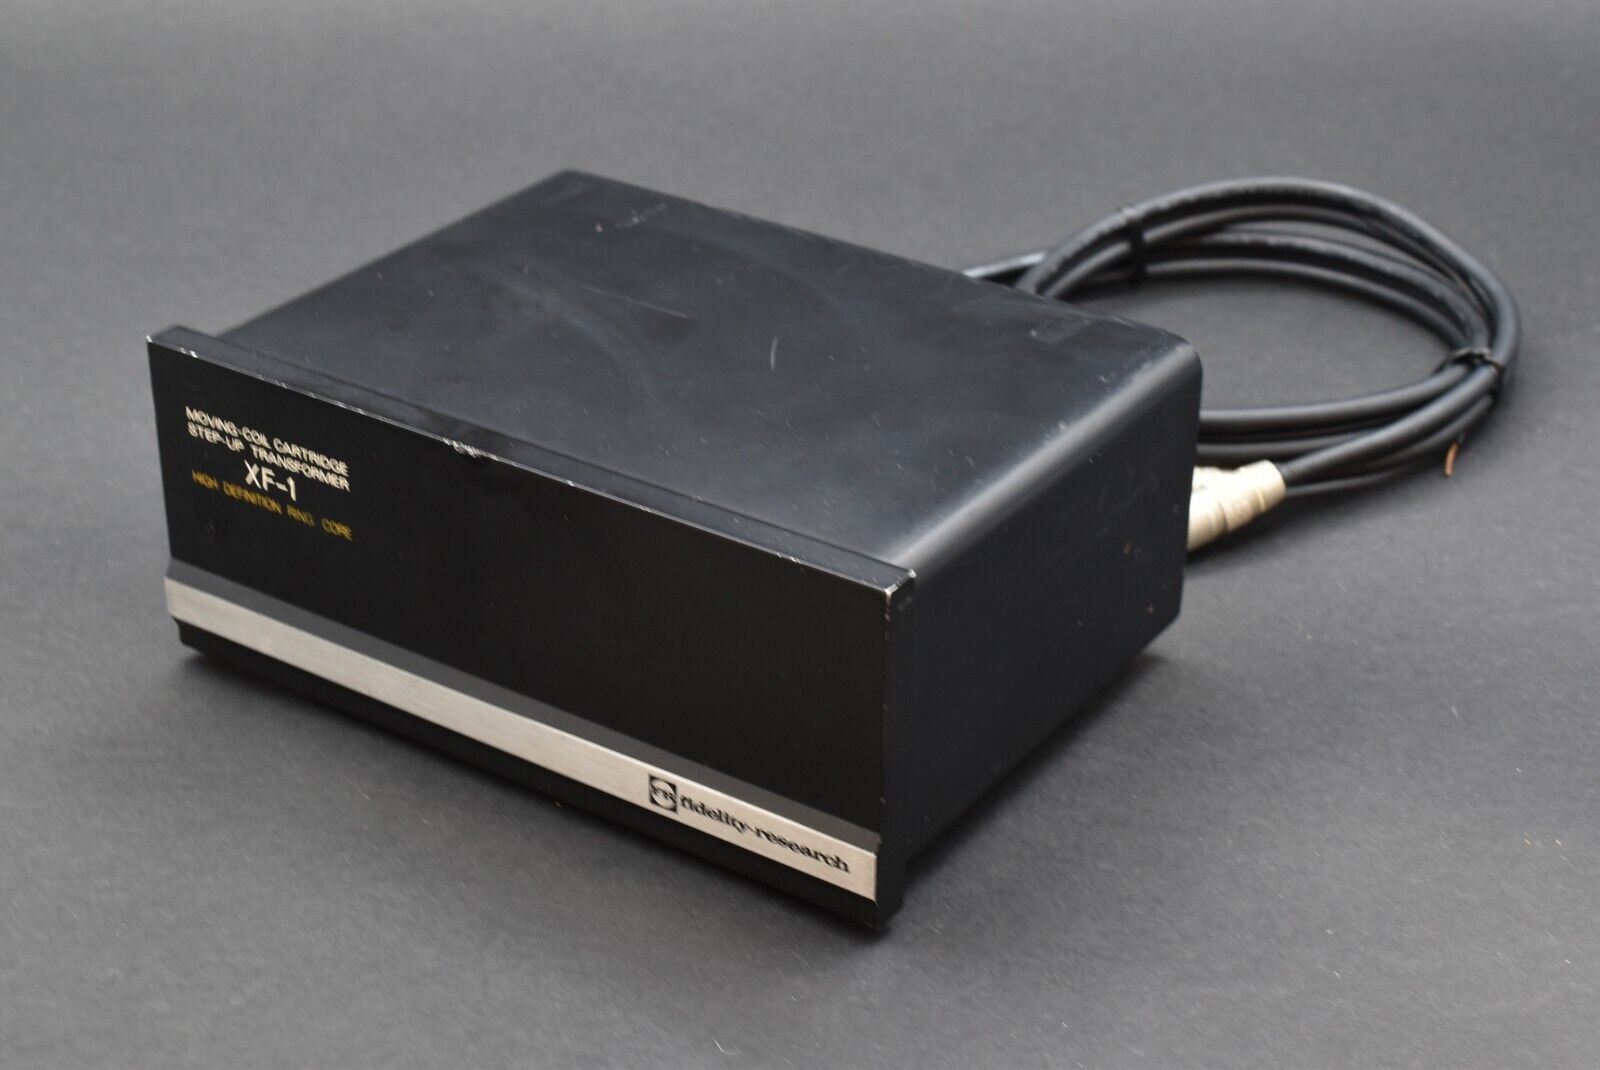 Fidelity Research XF-1 Type H MC Step Up Transformer